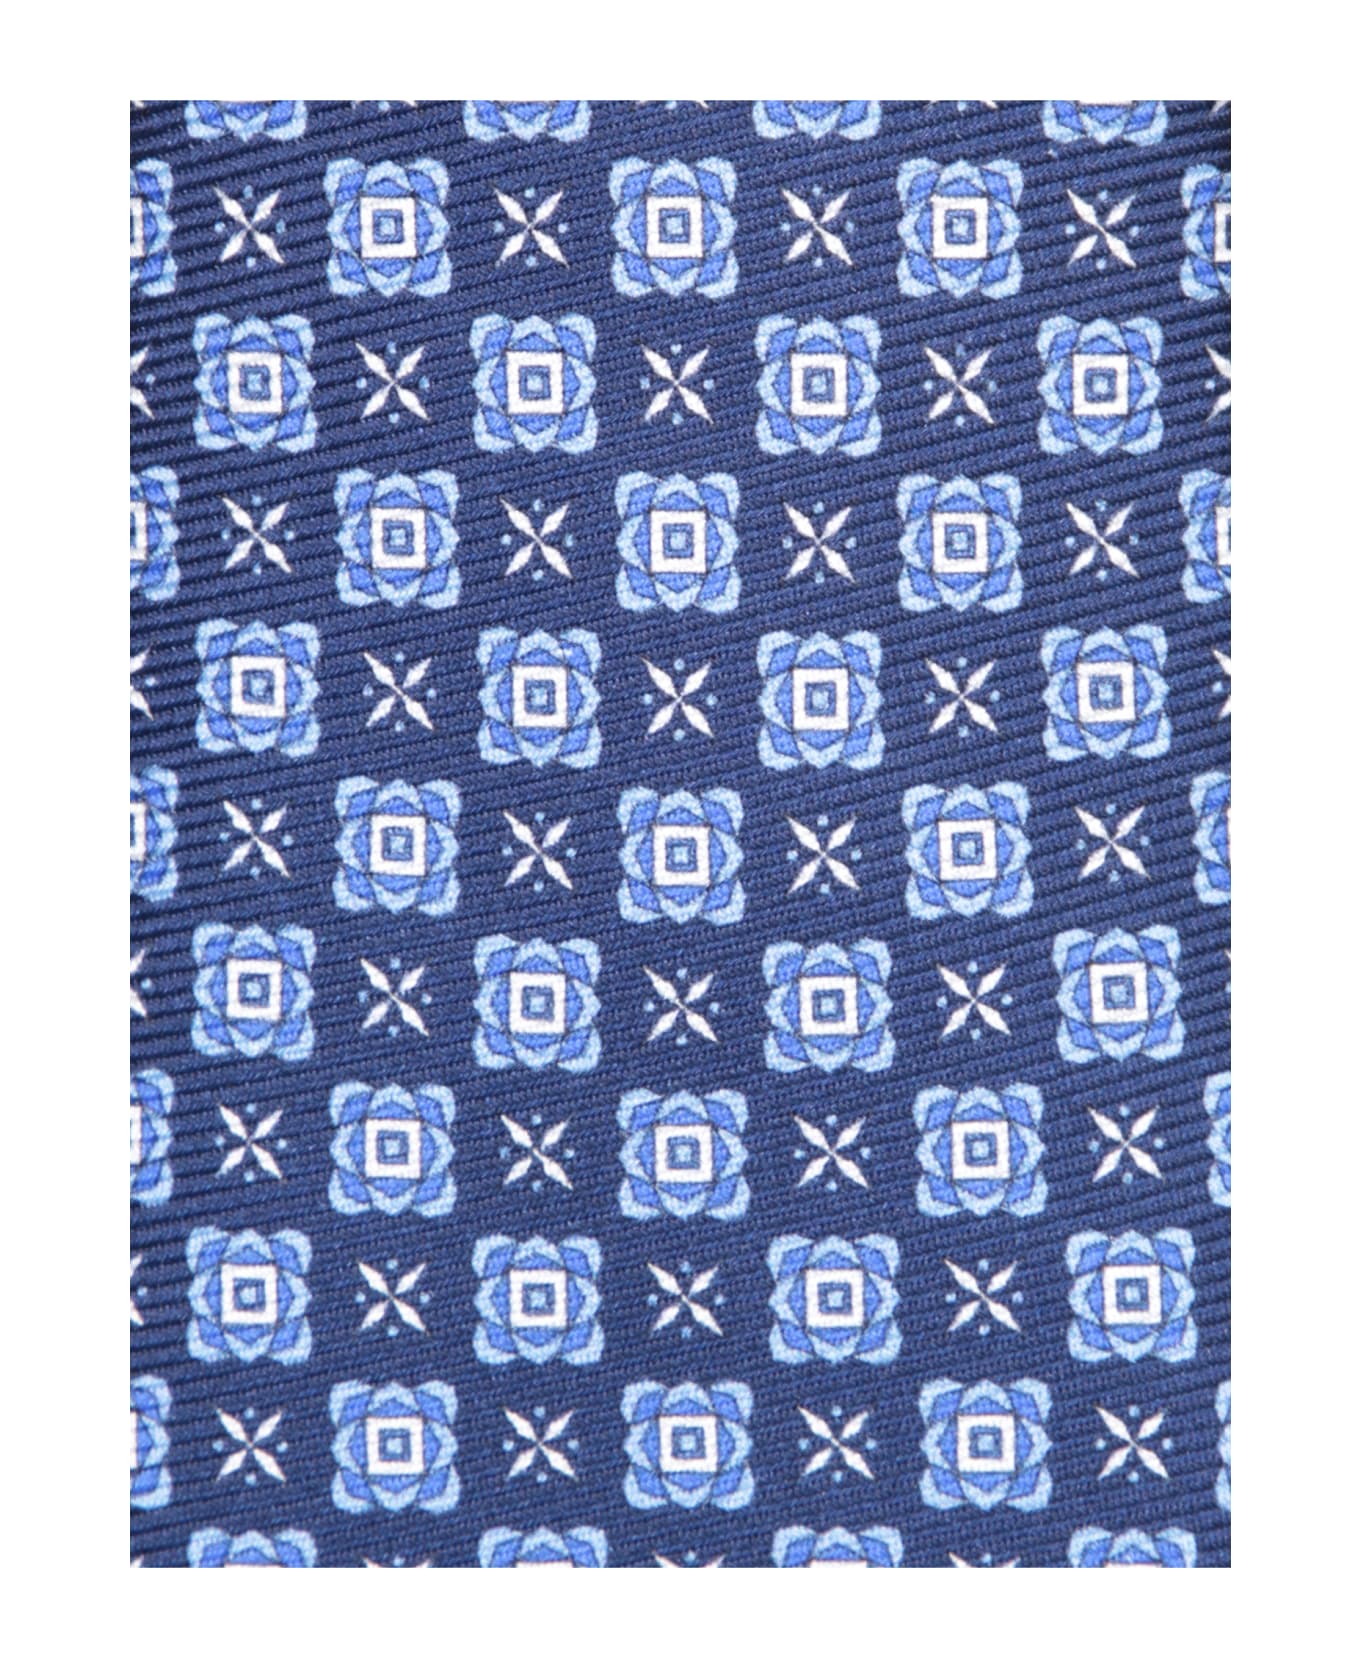 Kiton Blue Patterned Tie - Blue ネクタイ